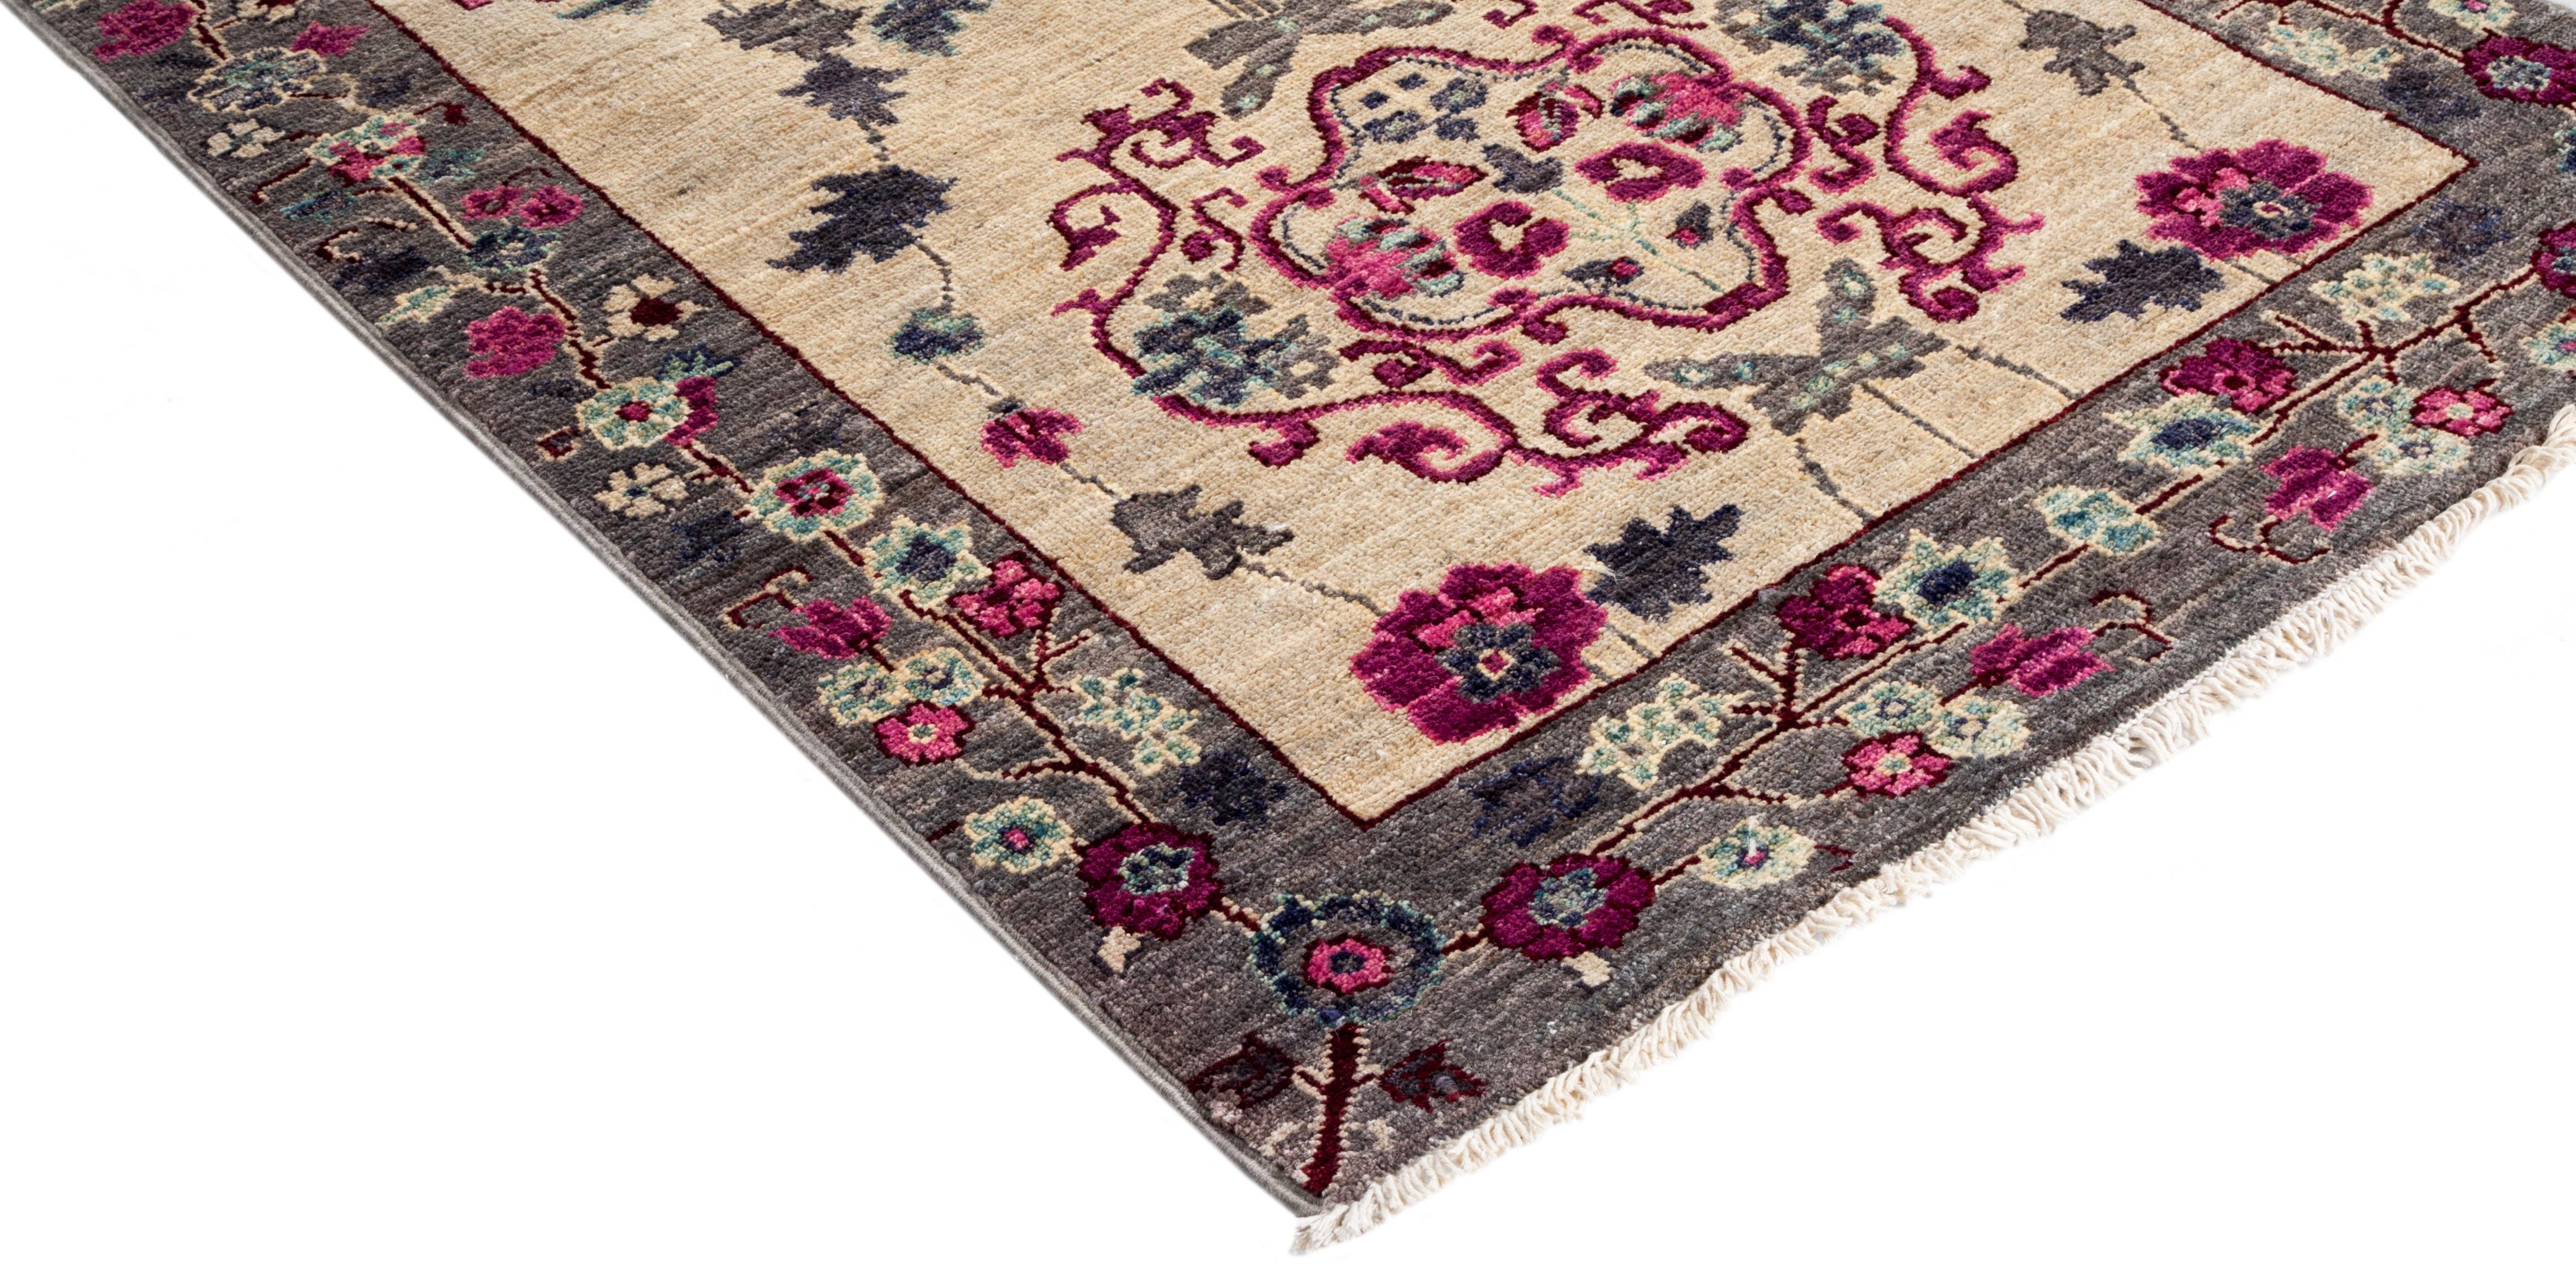 Color: Ivory, made in Pakistan. 100% wool. Whether boasting a field of flowers or ancient tribal symbols, patterned rugs are the easiest way to enrich a space. Subtle colors and intricate motifs reinforce the quiet sophistication of a traditional